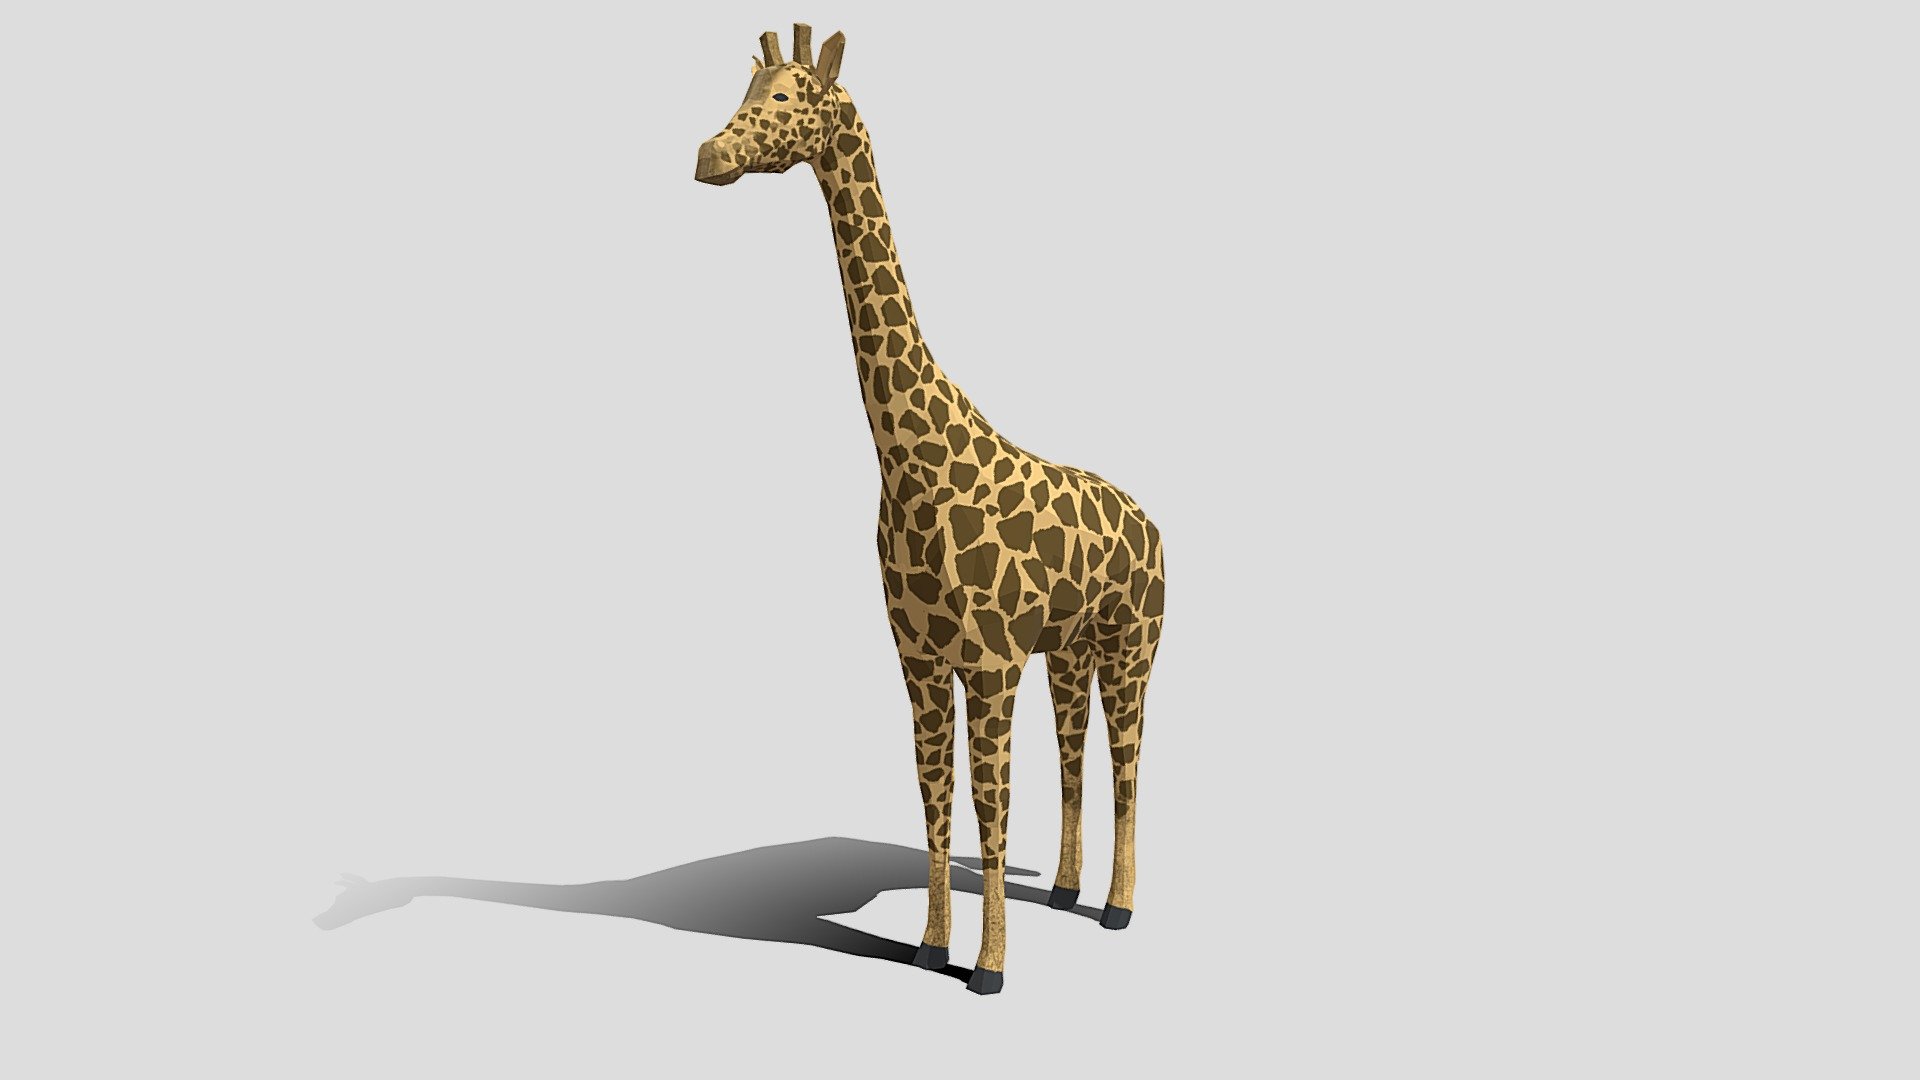 This is a low poly 3d model of a giraffe. The low poly giraffe was modeled and prepared for low-poly style renderings, background, general CG visualization presented as a mesh with quads only.

Verts : 1.118 Faces: 1.116

Hand painted diffuse texture is included, UV unwrap and mapping is available

The original file was created in blender. You will receive a 3DS, OBJ, FBX, blend, DAE, STL.

Warning: Depending on which software package you are using, the exchange formats (.obj, .3ds, .dae .fbx) may not match the preview images exactly. Due to the nature of these formats, there may be some textures that have to be loaded by hand and possibly triangulated geometry.

All preview images were rendered with Blender Cycles. Product is ready to render out-of-the-box. Please note that the lights, cameras, and background is only included in the .blend file. The model is clean and alone in the other provided files, centered at origin and has real-world scale 3d model